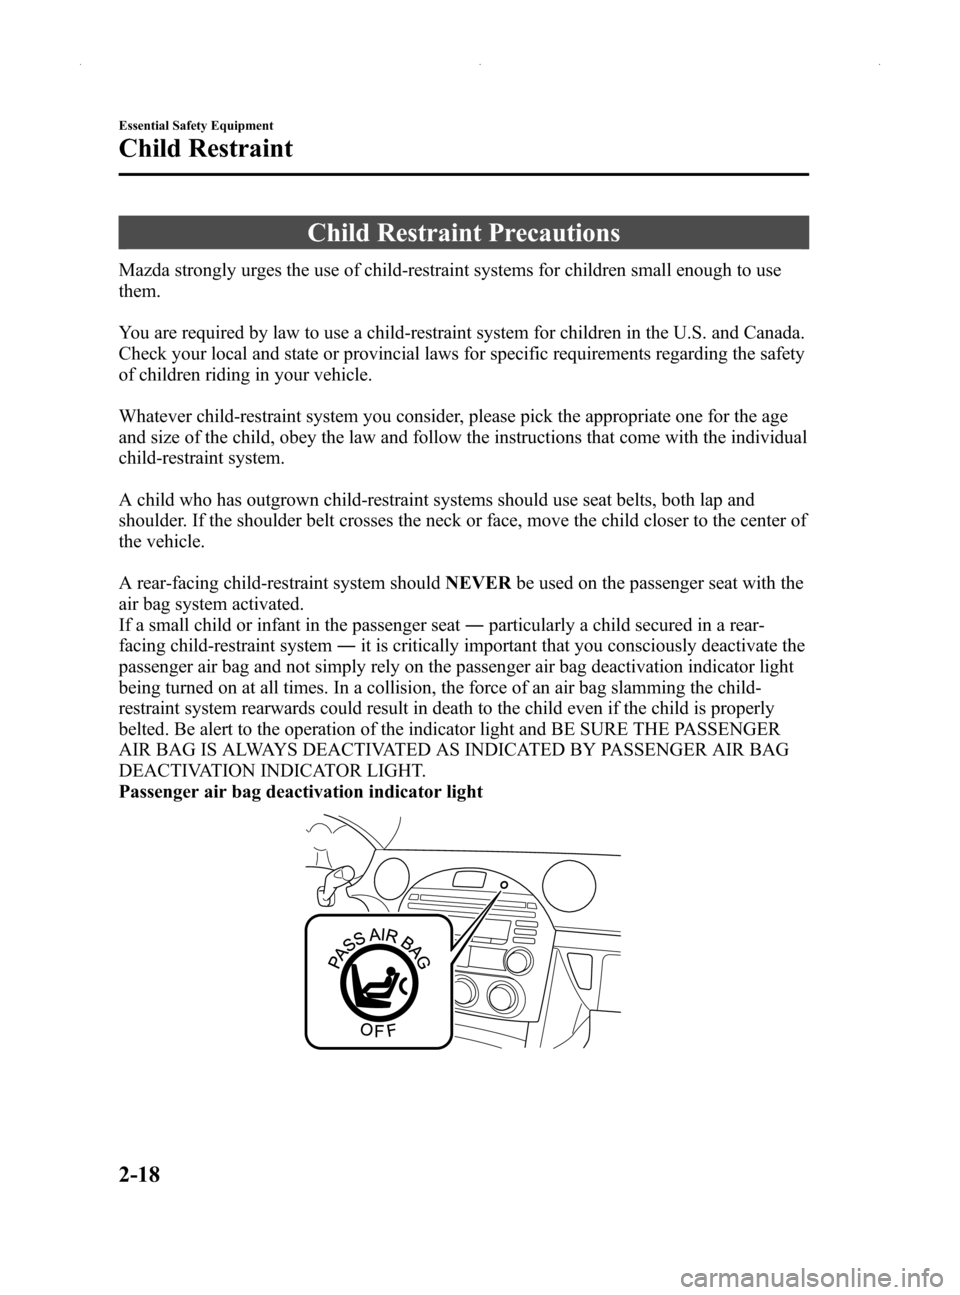 MAZDA MODEL MX-5 2014   (in English) Owners Manual Black plate (30,1)
Child Restraint Precautions
Mazda strongly urges the use of child-restraint systems for children small enough to use
them.
You are required by law to use a child-restraint system fo